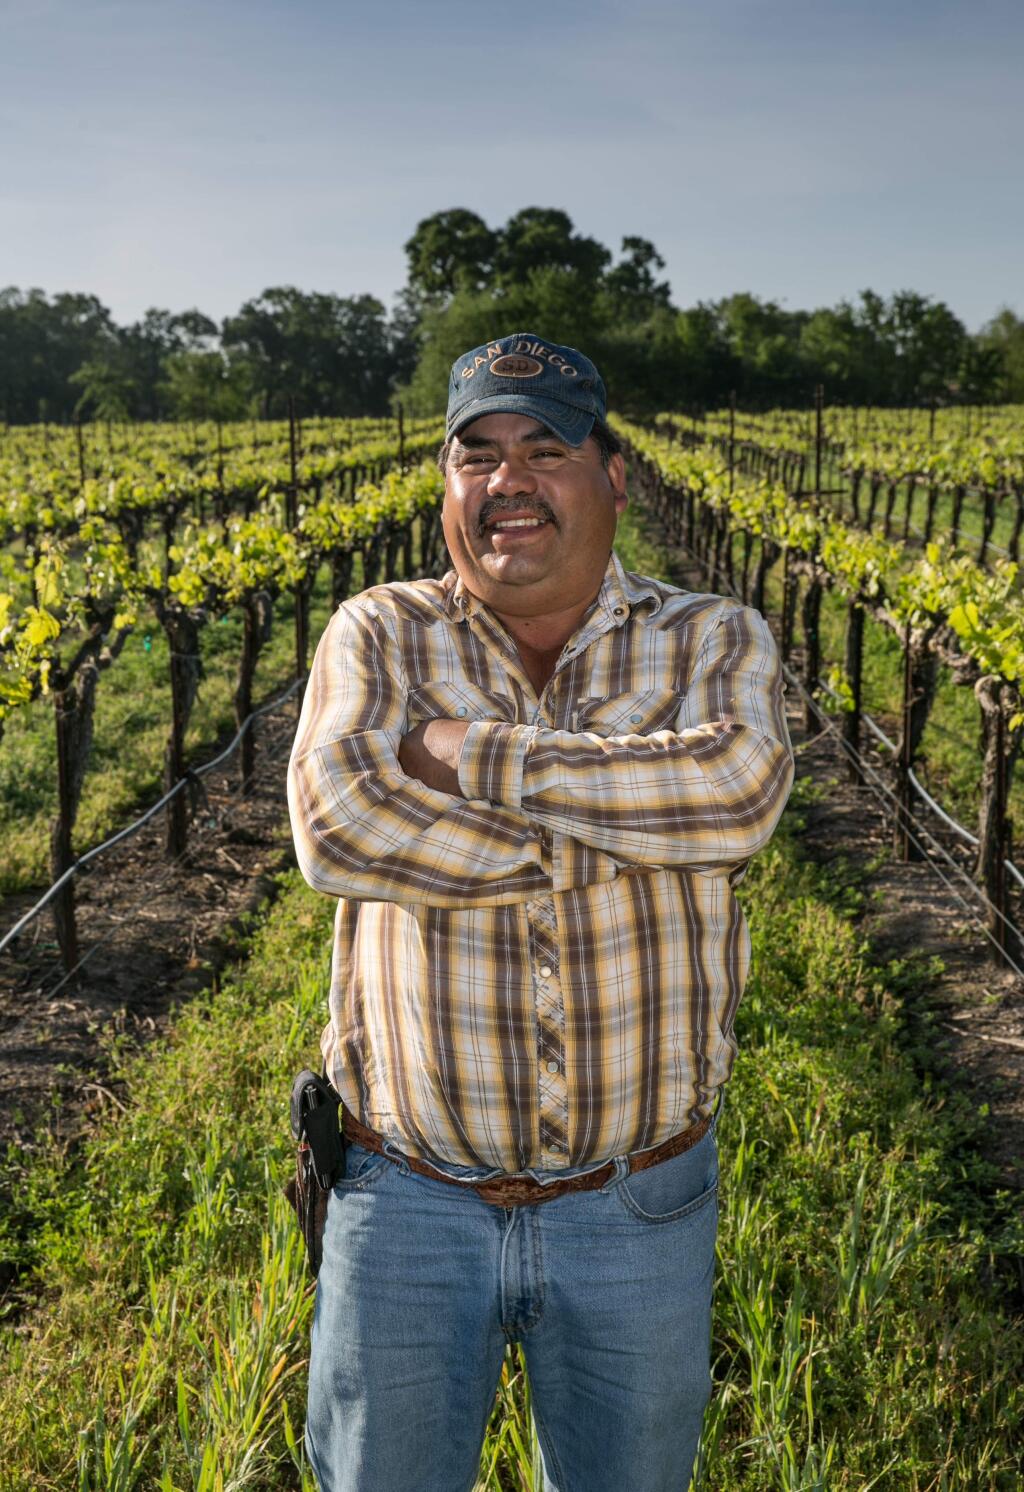 Gabino Ramirez, who been working for Serres Ranch for over 30 years. (Courtesy Photo)